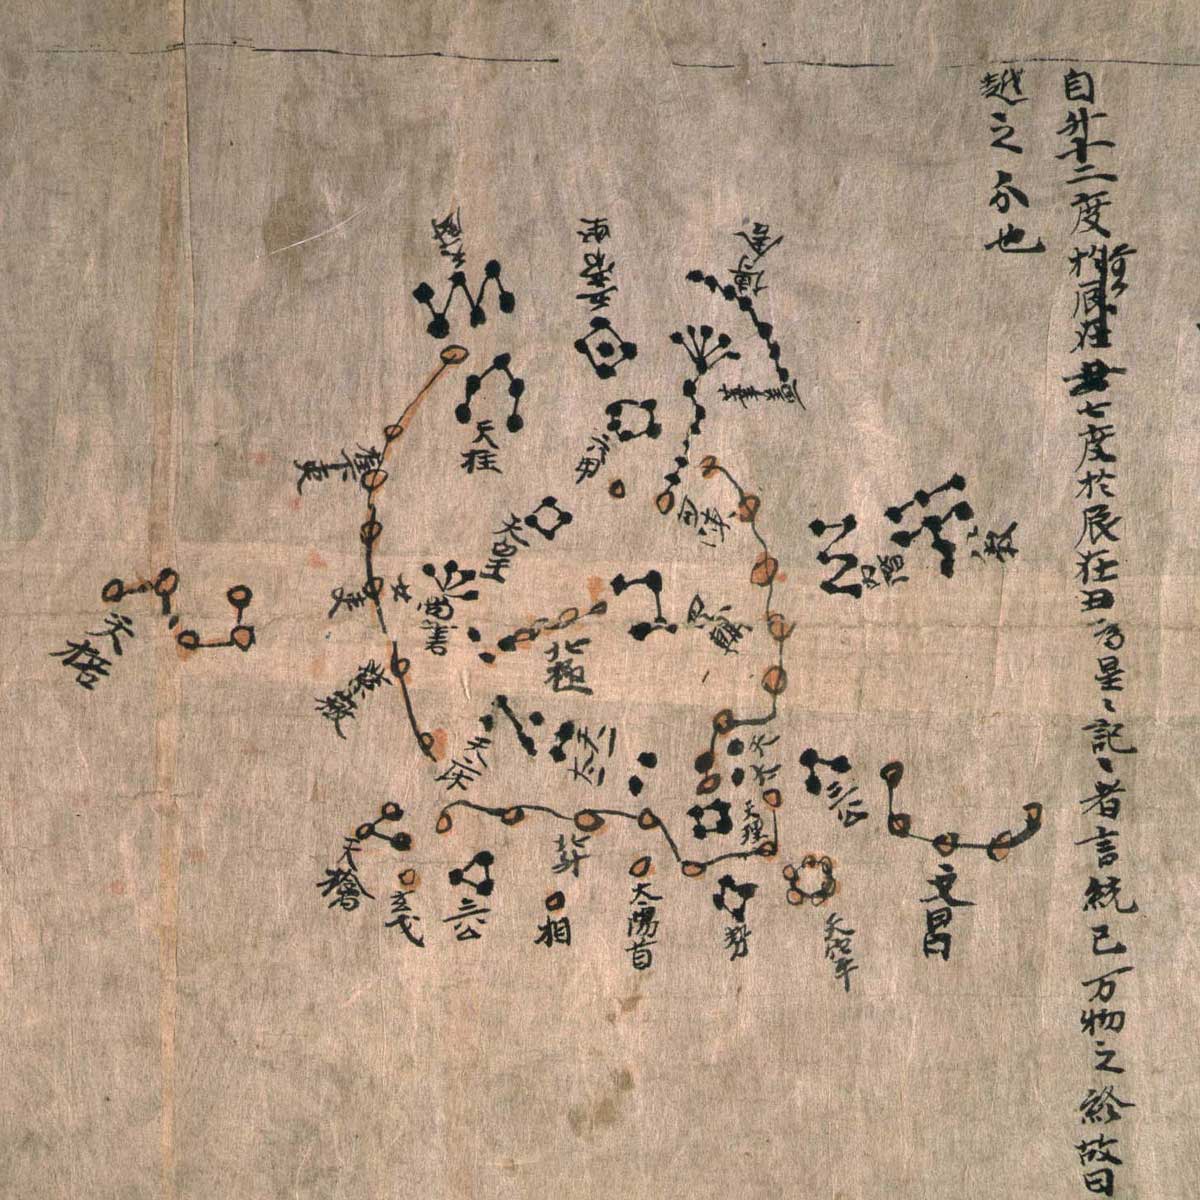 Dunhuang Chinese Star chart 